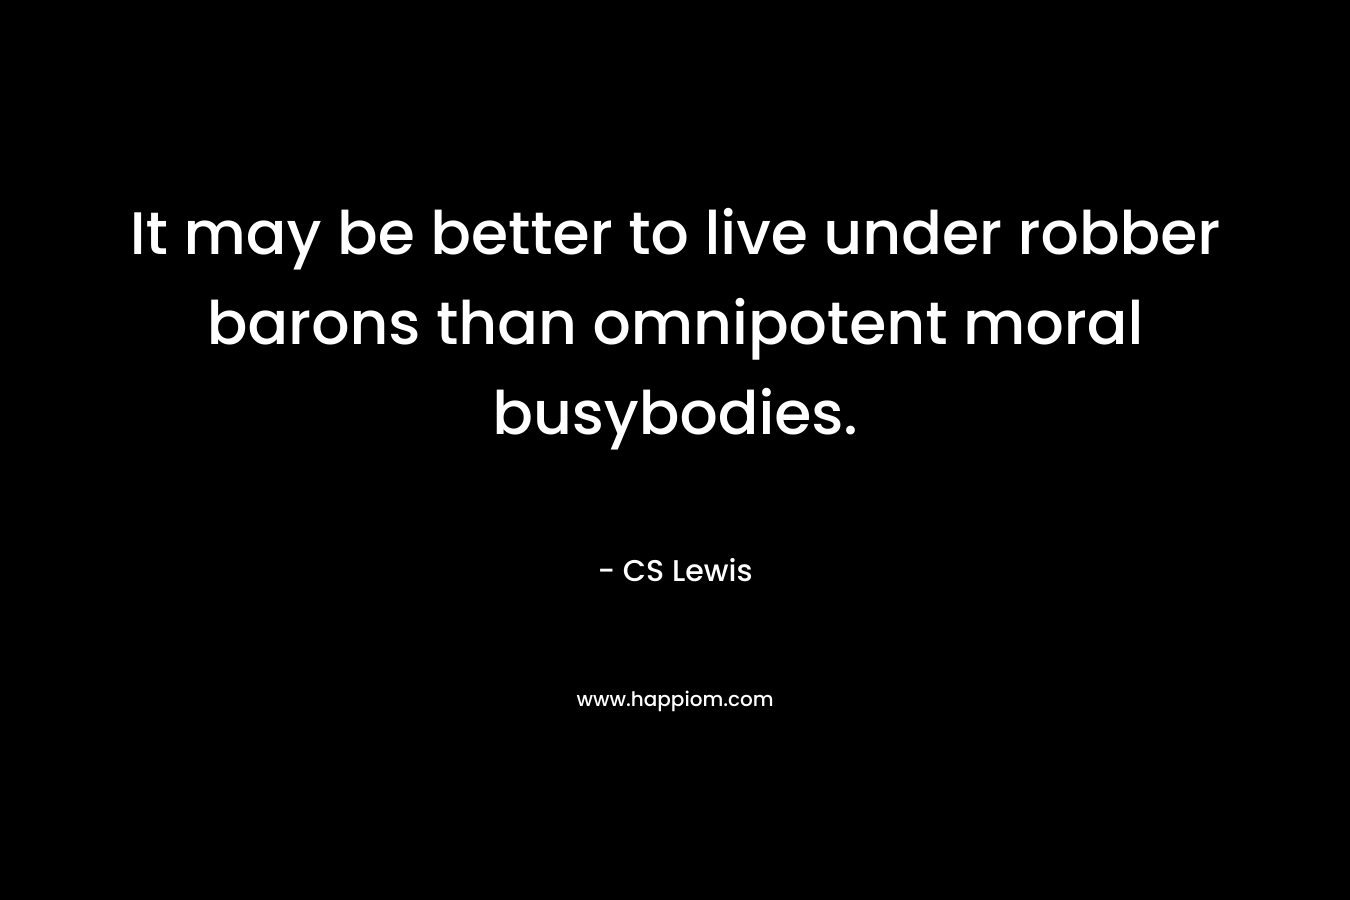 It may be better to live under robber barons than omnipotent moral busybodies.